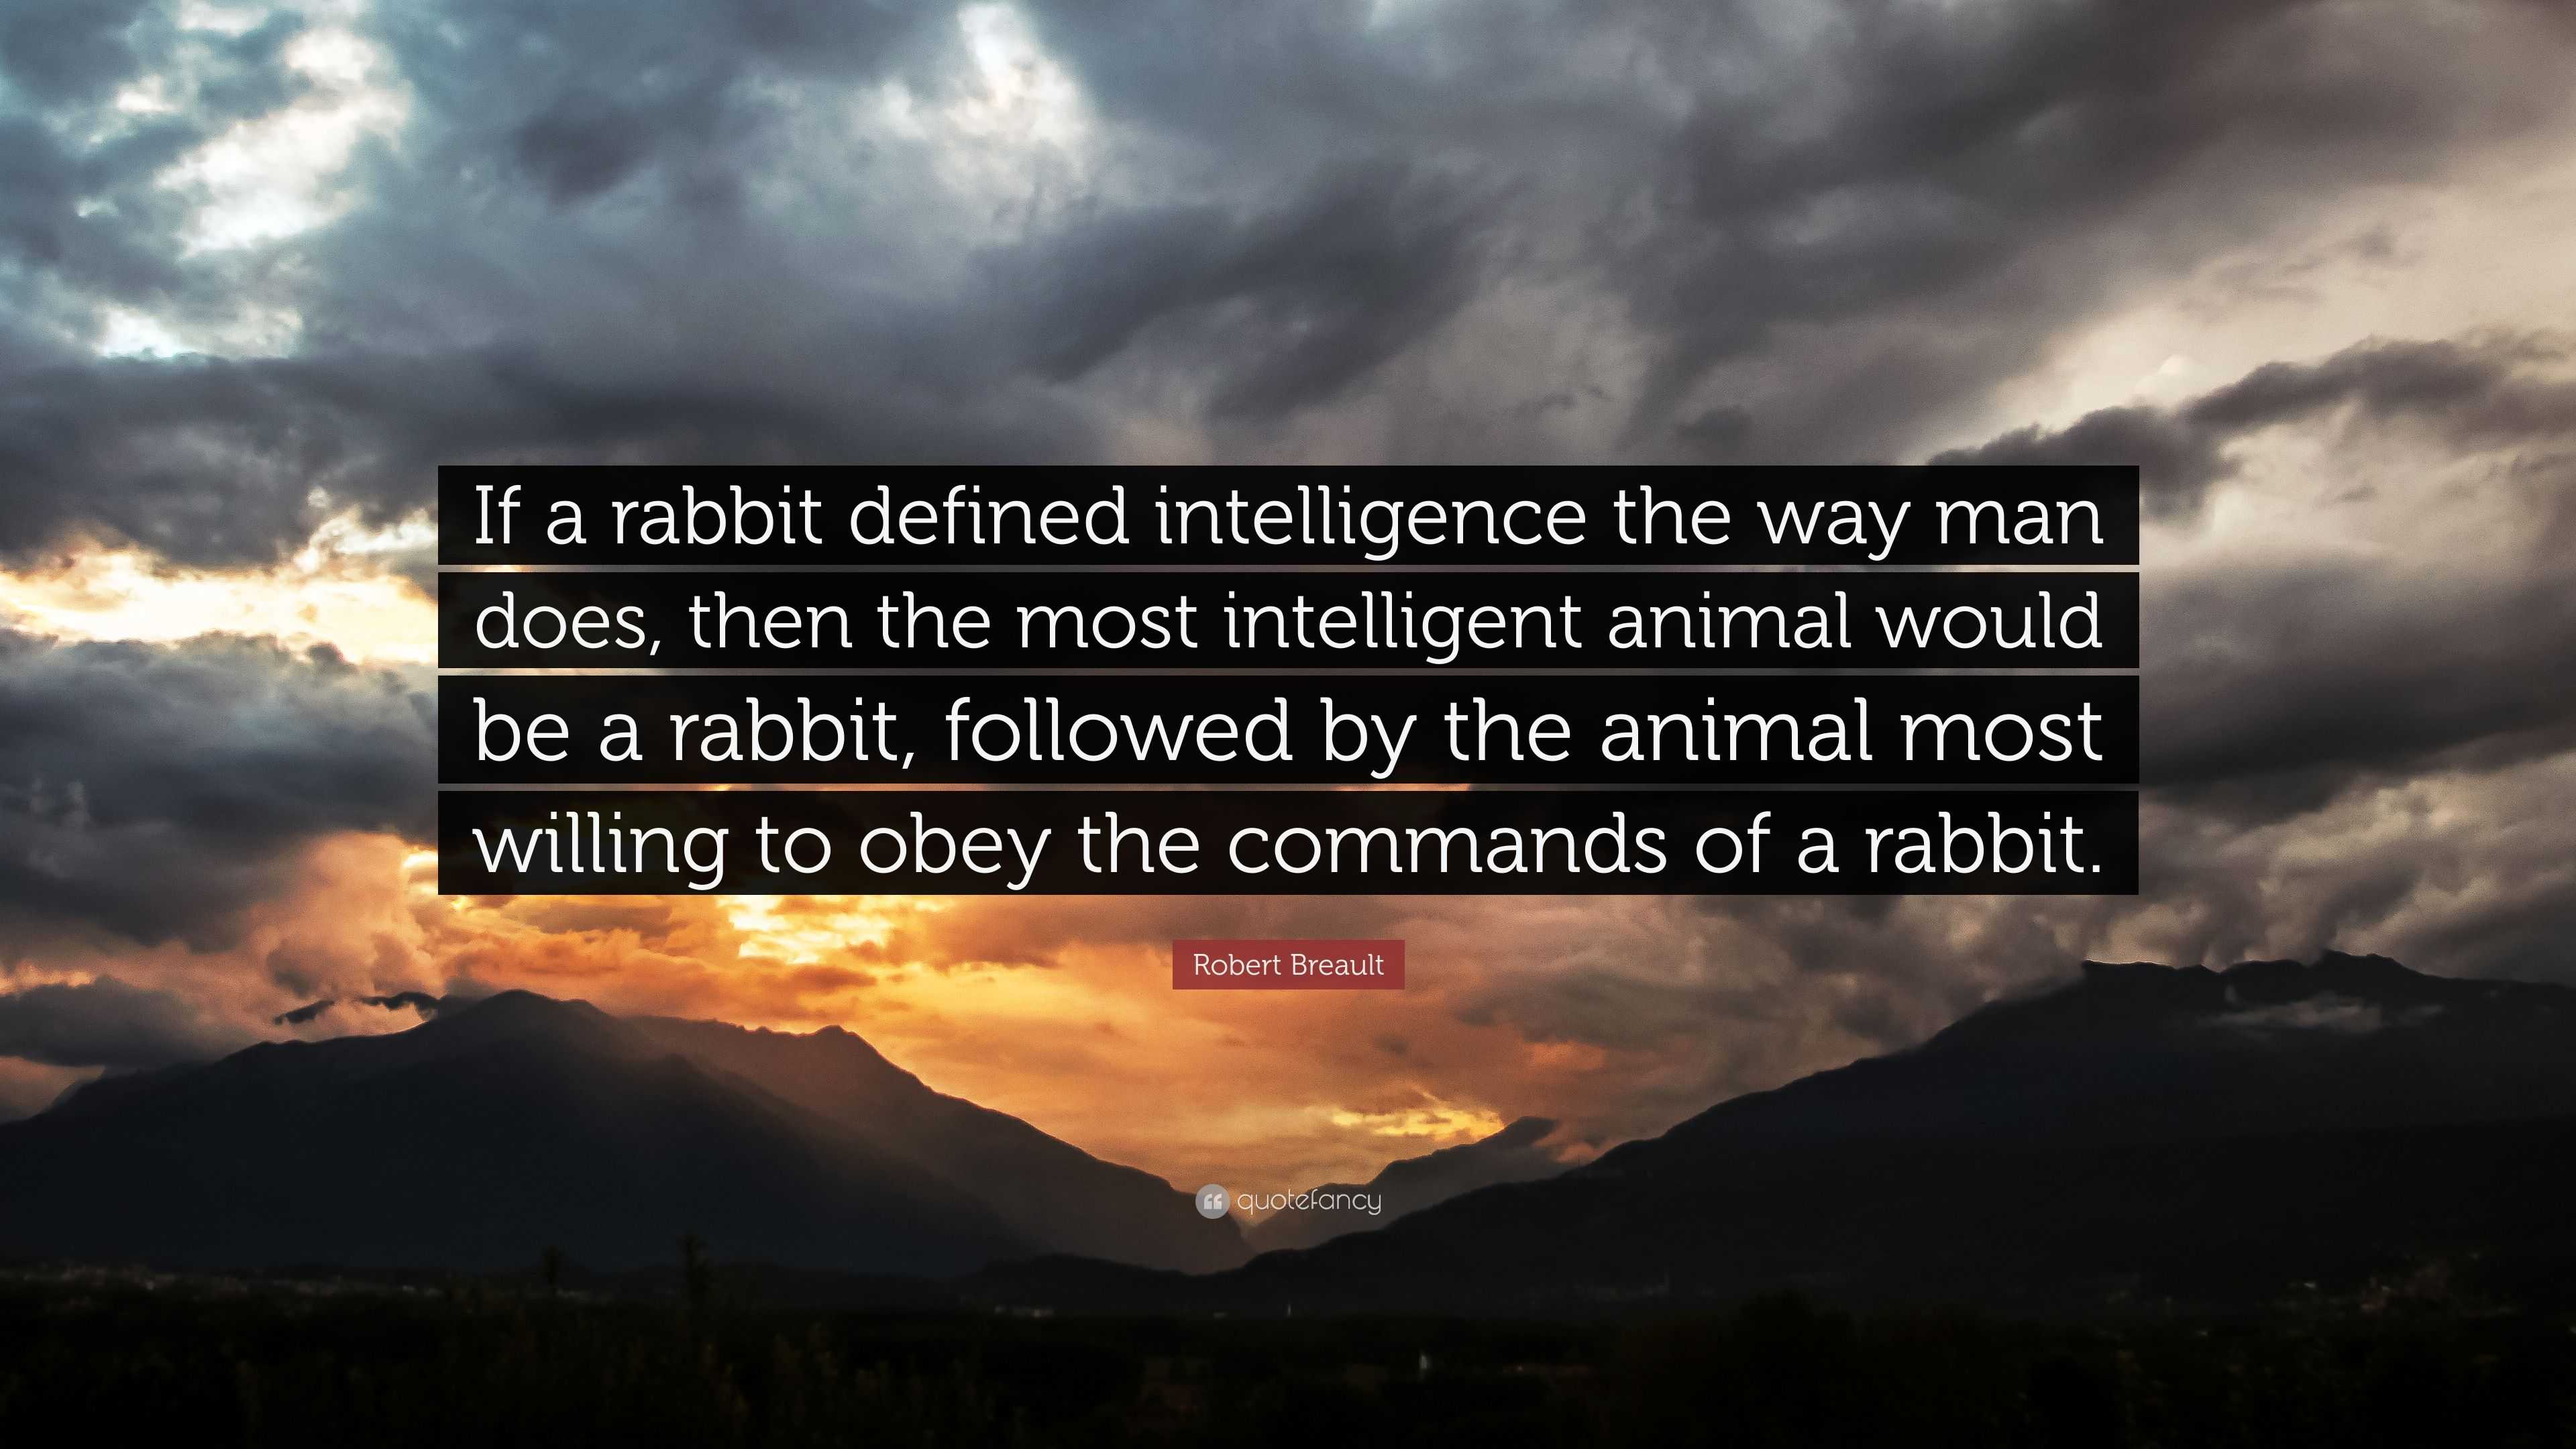 Robert Breault Quote: “If a rabbit defined intelligence the way man does,  then the most intelligent animal would be a rabbit, followed by the a...”